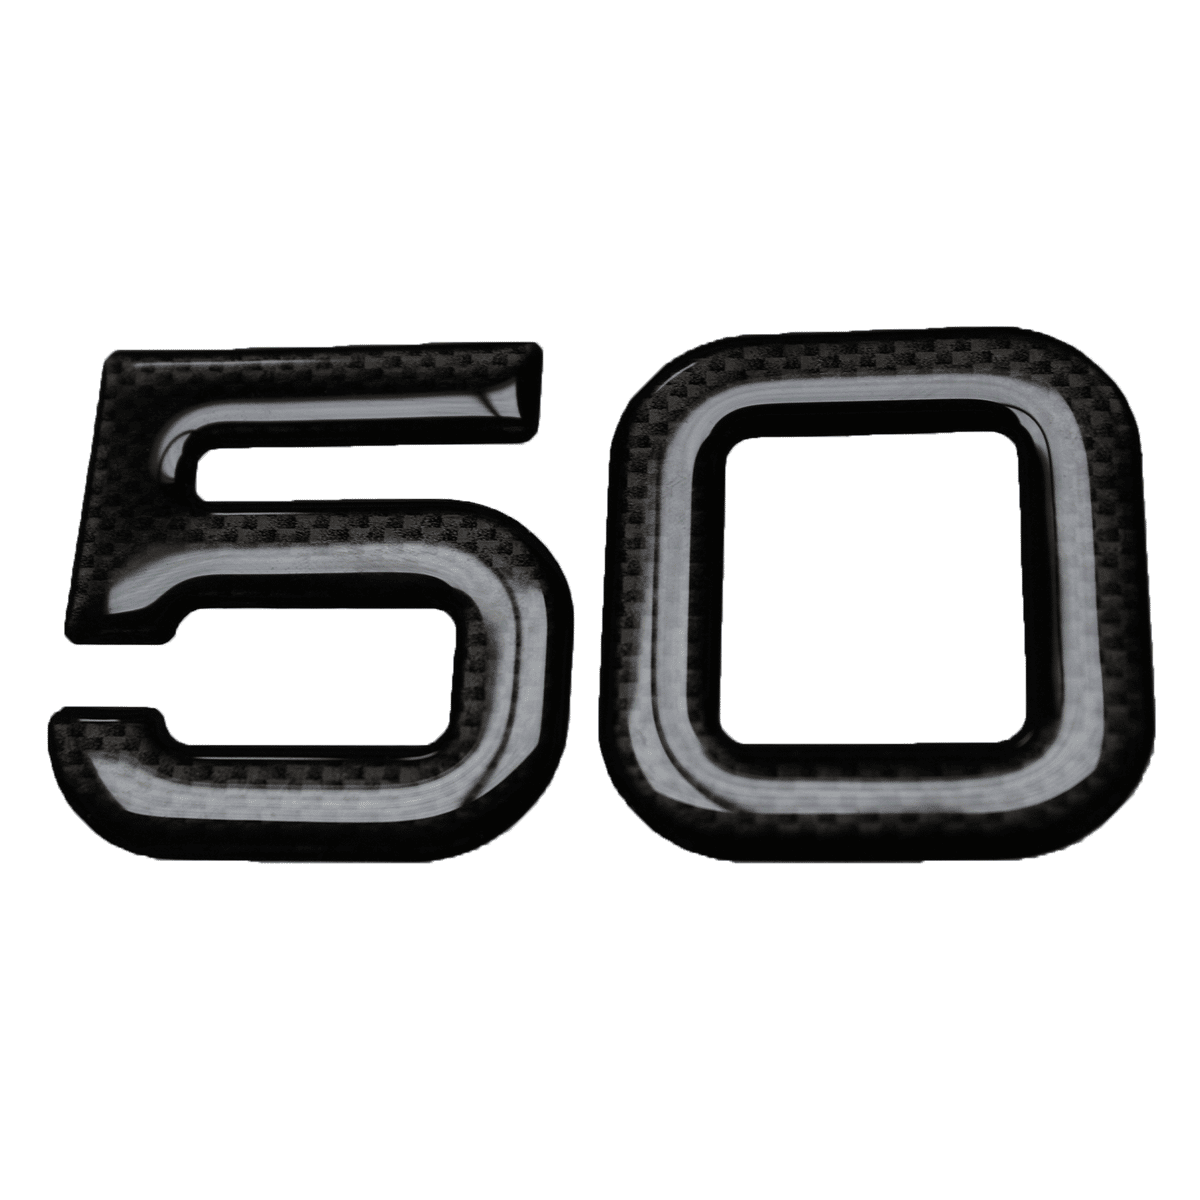 50 Black Carbon Style Number Plate Digits